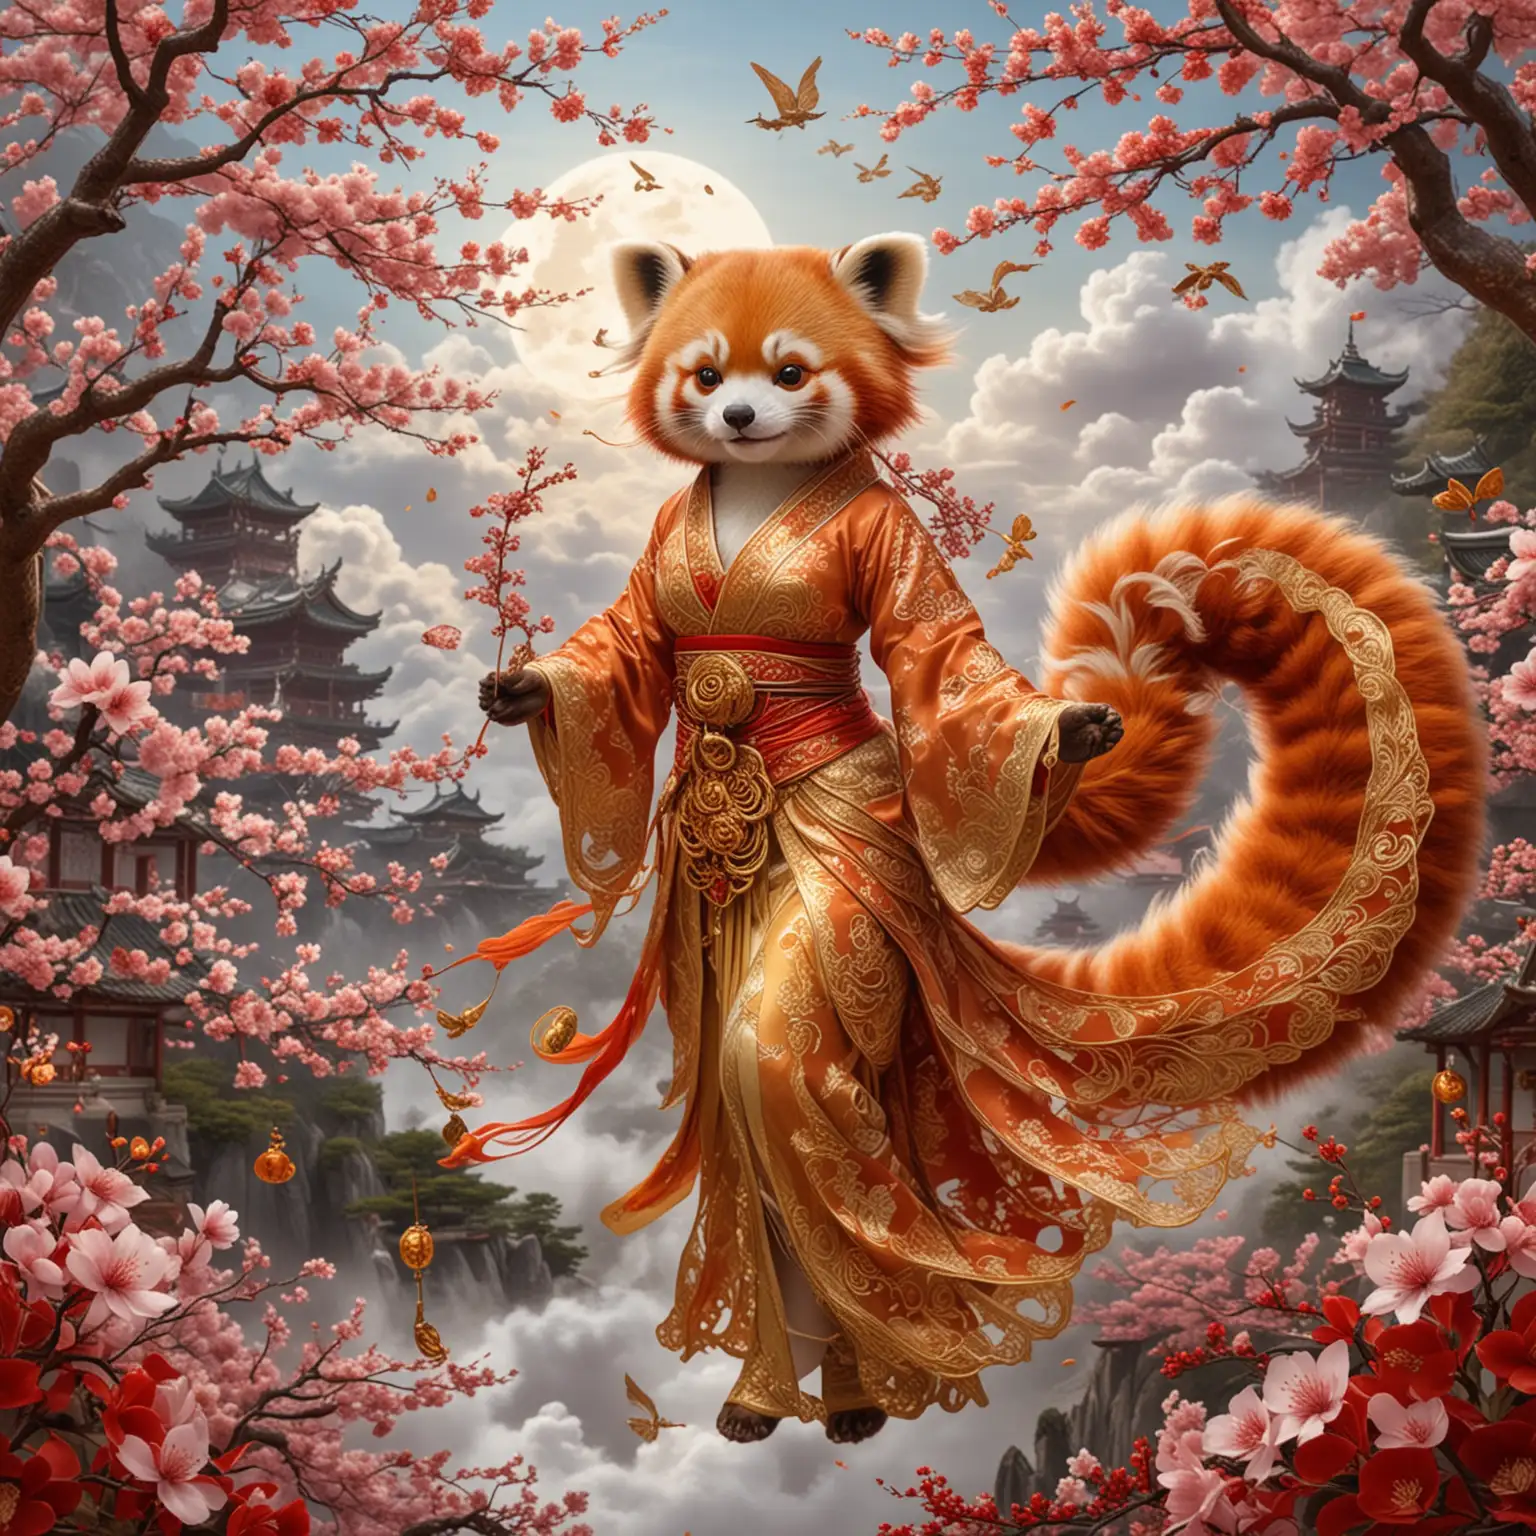 A red panda lady  with 9 tails  wears intricate golden wire lace all down her body, this oriental ornamentation serves to honor the gods of rejuvenation and spring,  a spirl of floating cherry blossoms form behind her on the wind. Far in the distance a cloud dragon smiles